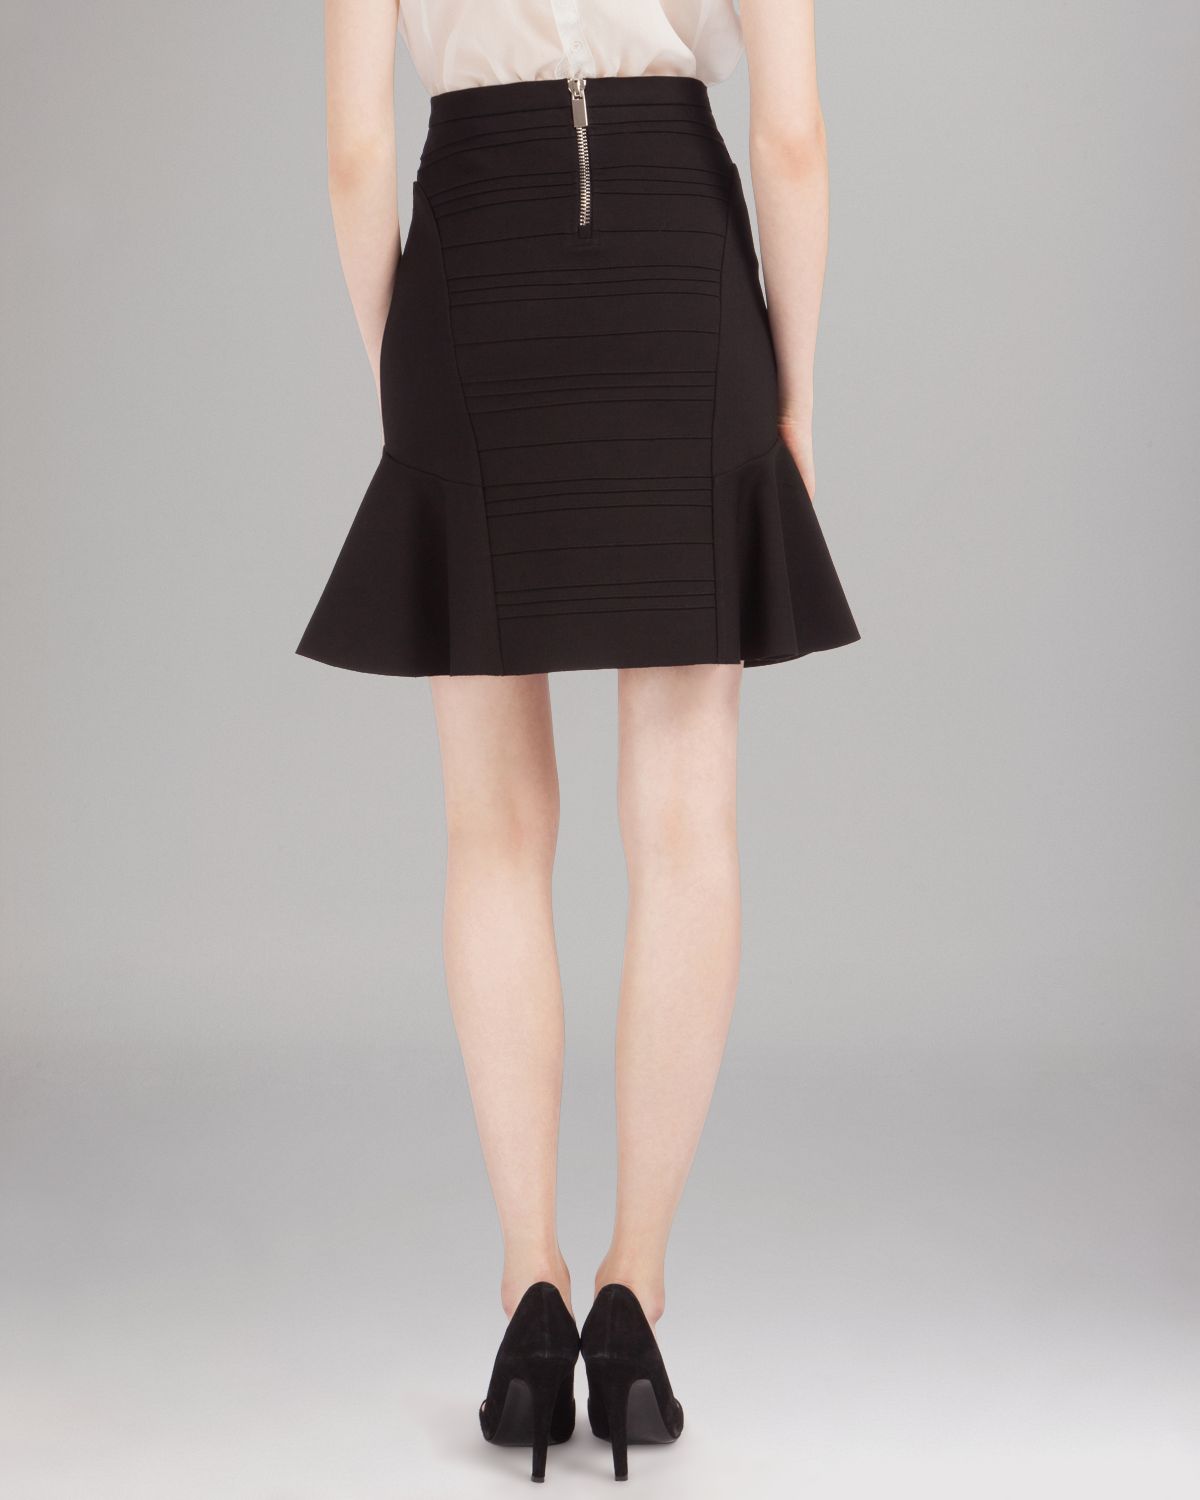 Lyst - Maje Skirt Fit and Flare in Black